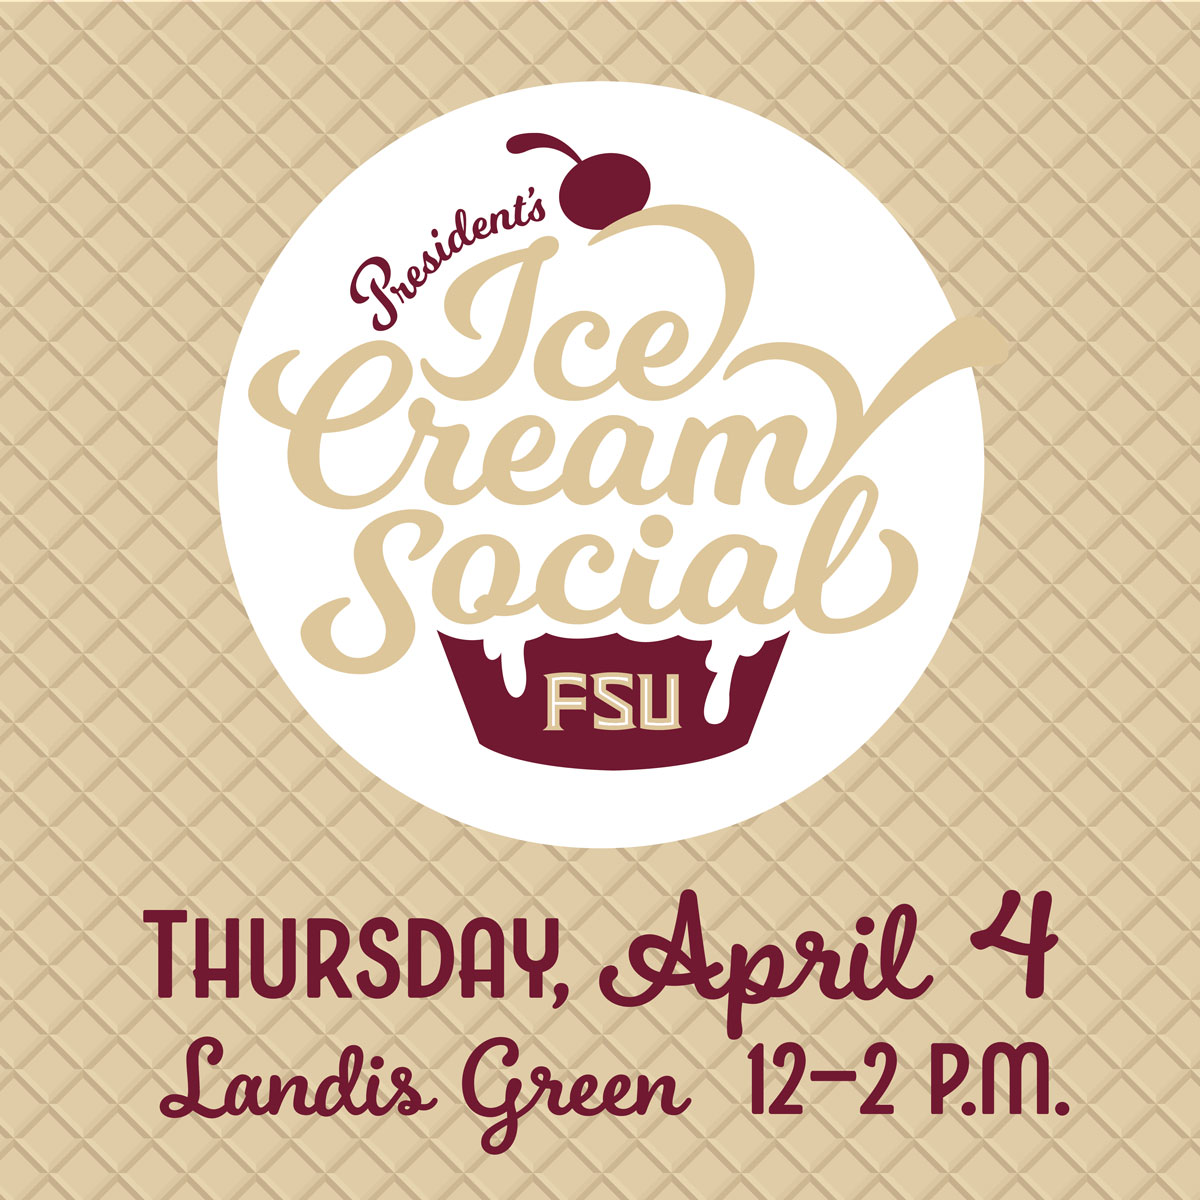 We all scream for ice cream! President Richard McCullough and First Lady Jai Vartikar invites you to the 2024 President’s Ice Cream Social tomorrow, Thursday, April 4, from 12-2 PM on Landis Green.